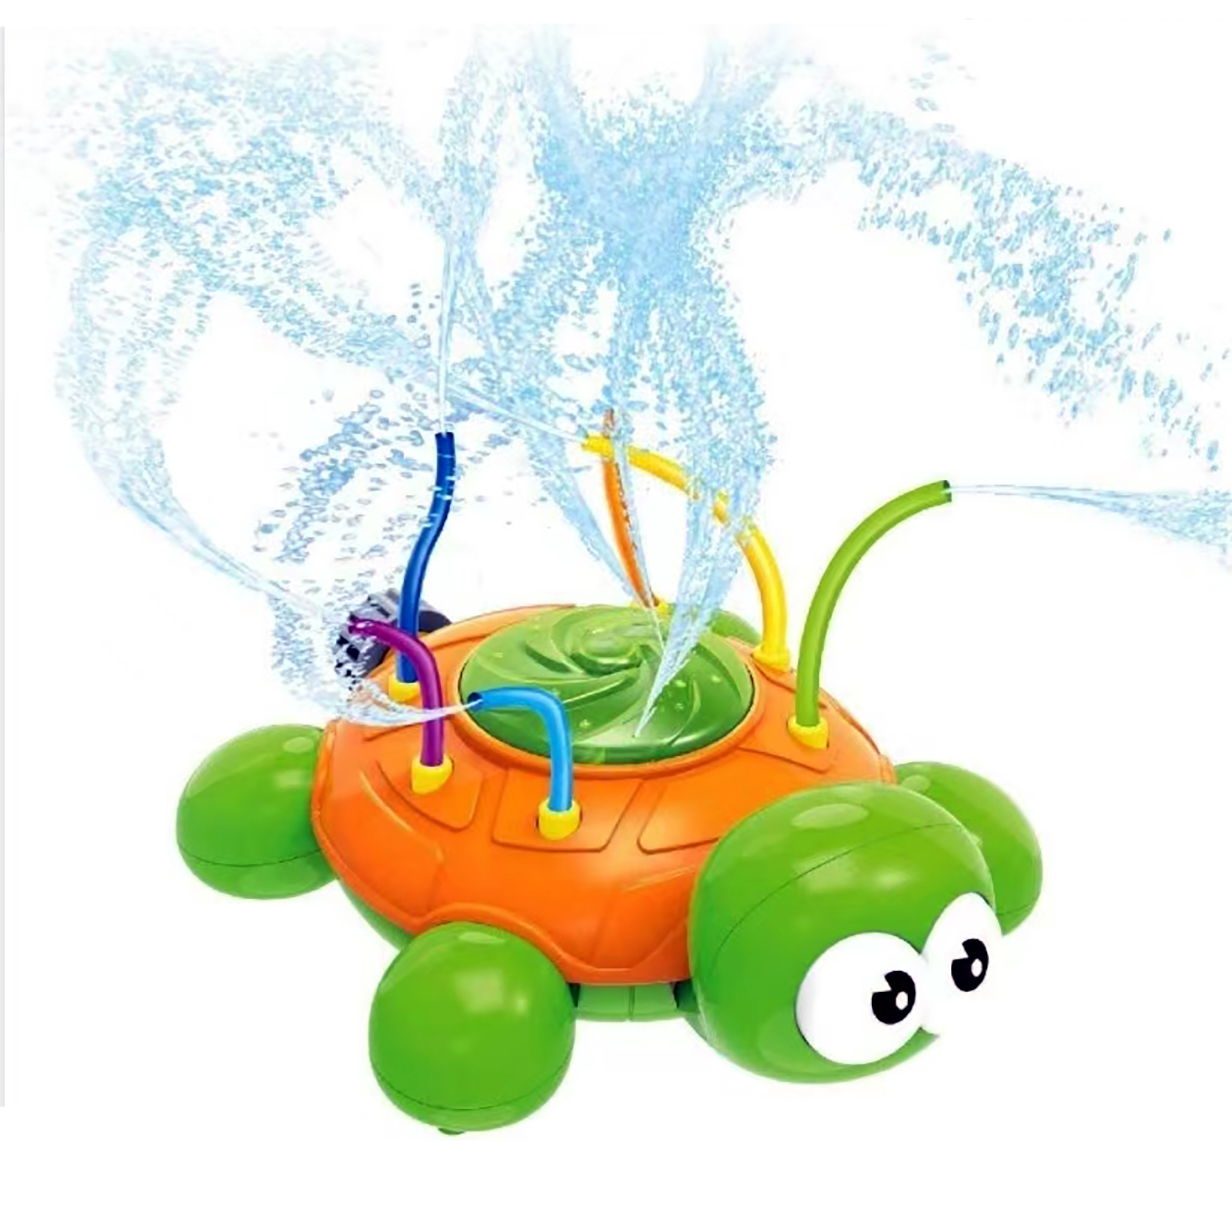 2CFun Sprinkler Toy for kids Water Fun Splash Play Toy Children Spinning Spray Turtle Outdoor Toys for Yard gift for Toddlers Boys Girls - image 1 of 6